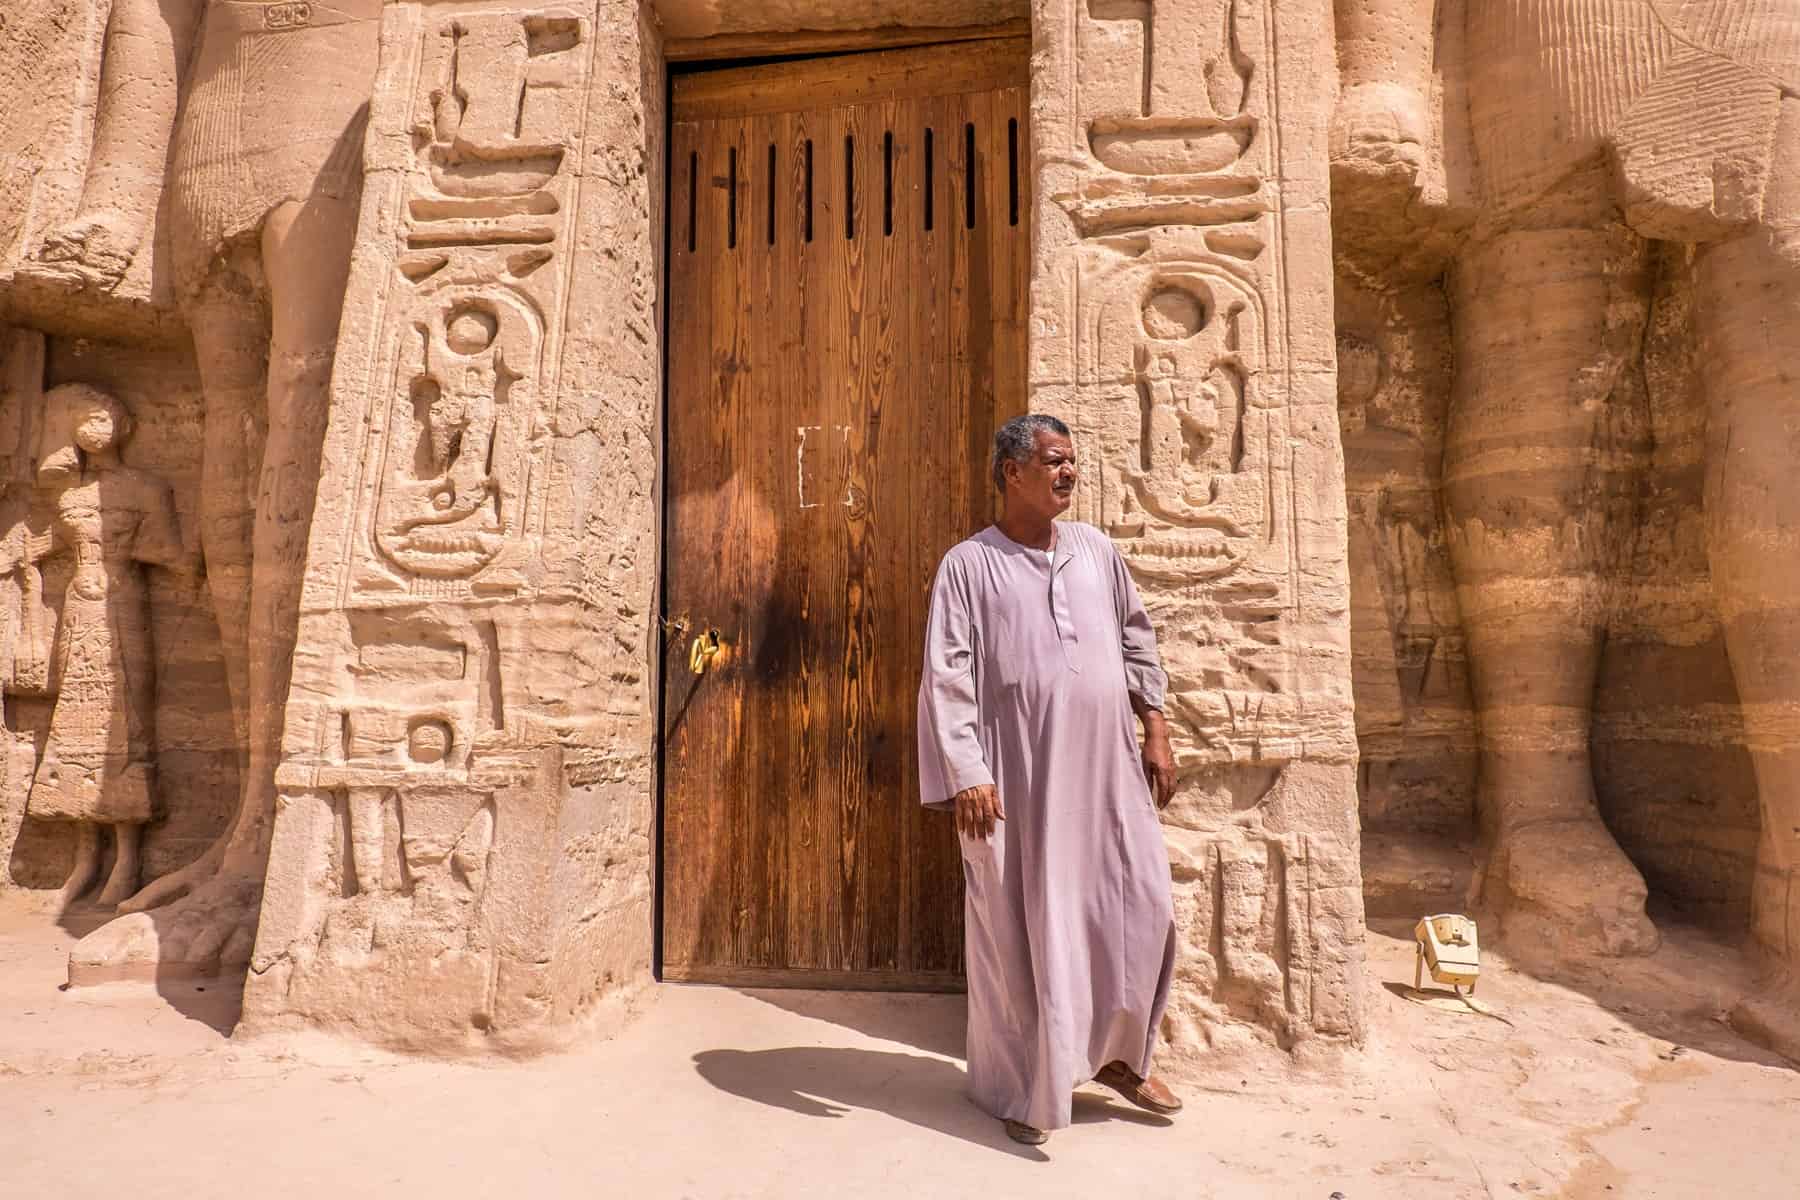 An Egyptian temple guard in a white tunic robe stands outside the carved columns at Abu Simbel Temple near Aswan